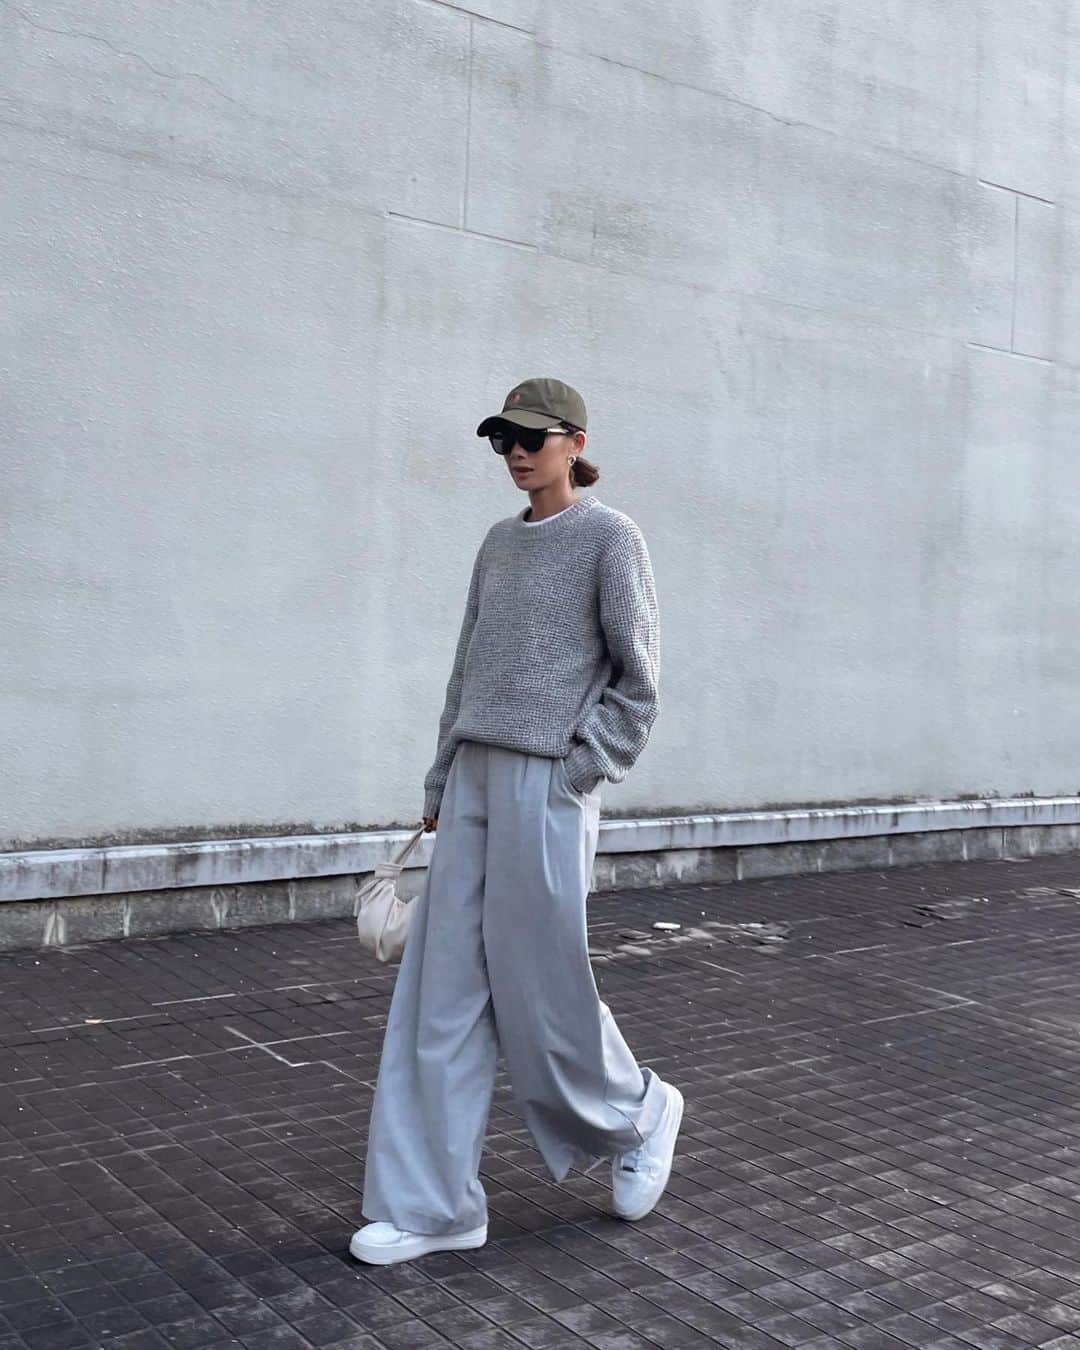 mamany704のインスタグラム：「* * Gray×Gray🦭🩶 * * #fashion#coordinate#ootd#outfits#outfitoftheday#outfit#gray#grayongray#allgray#knit#sneakers#nike#airforce1#airforce1sagelow#widepants#polo#ralphlauren#poloralphlauren#cap#ファッション#コーディネート#グレーコーデ#グレーonグレー#大人カジュアル#ワイドパンツ#キャップコーデ#ラルフローレン#スニーカーコーデ#ワントーンコーデ」